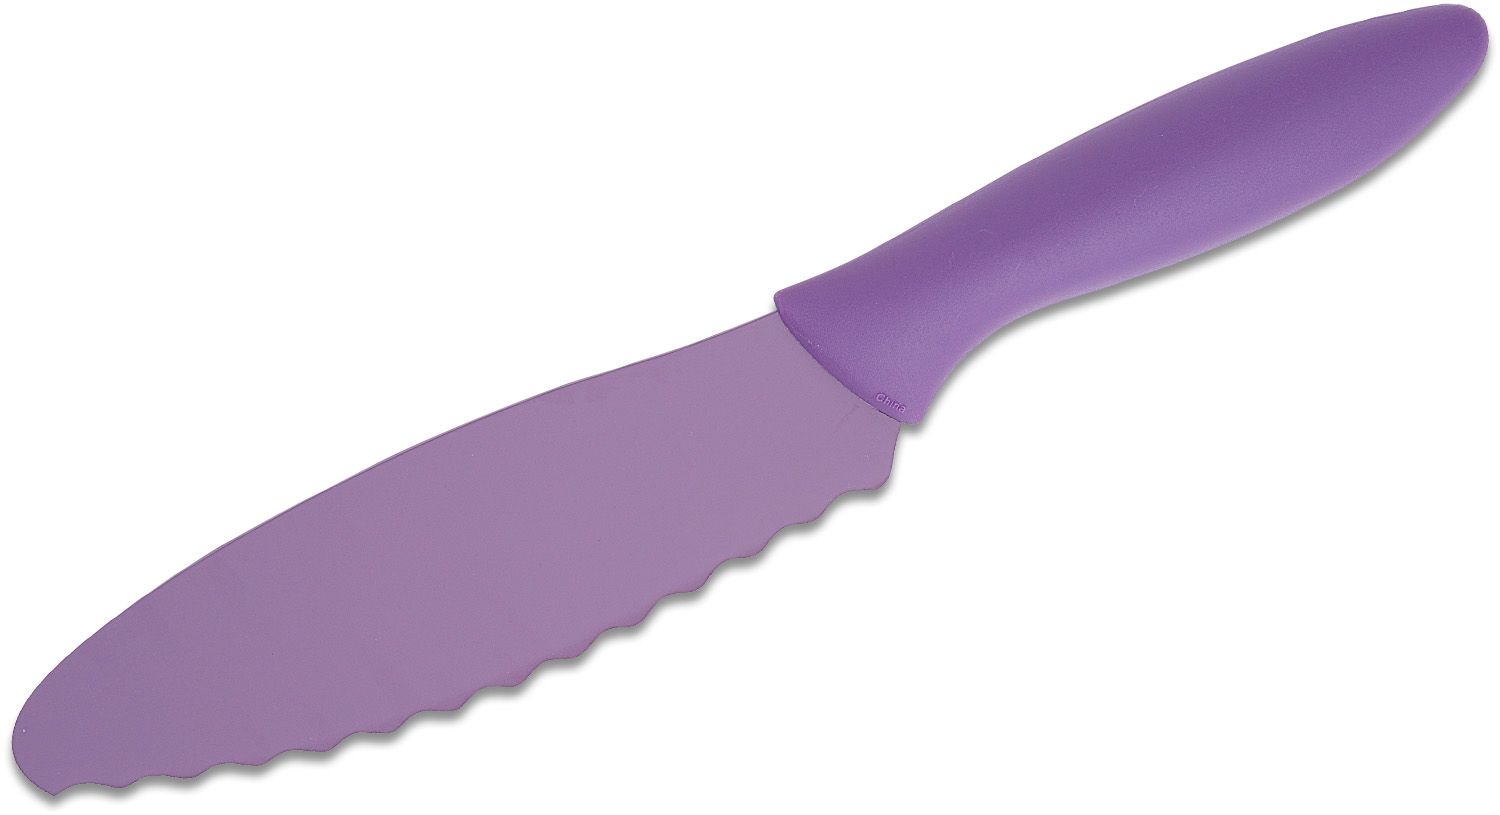 Choice 3 1/4 Serrated Edge Paring Knife with Purple Handle